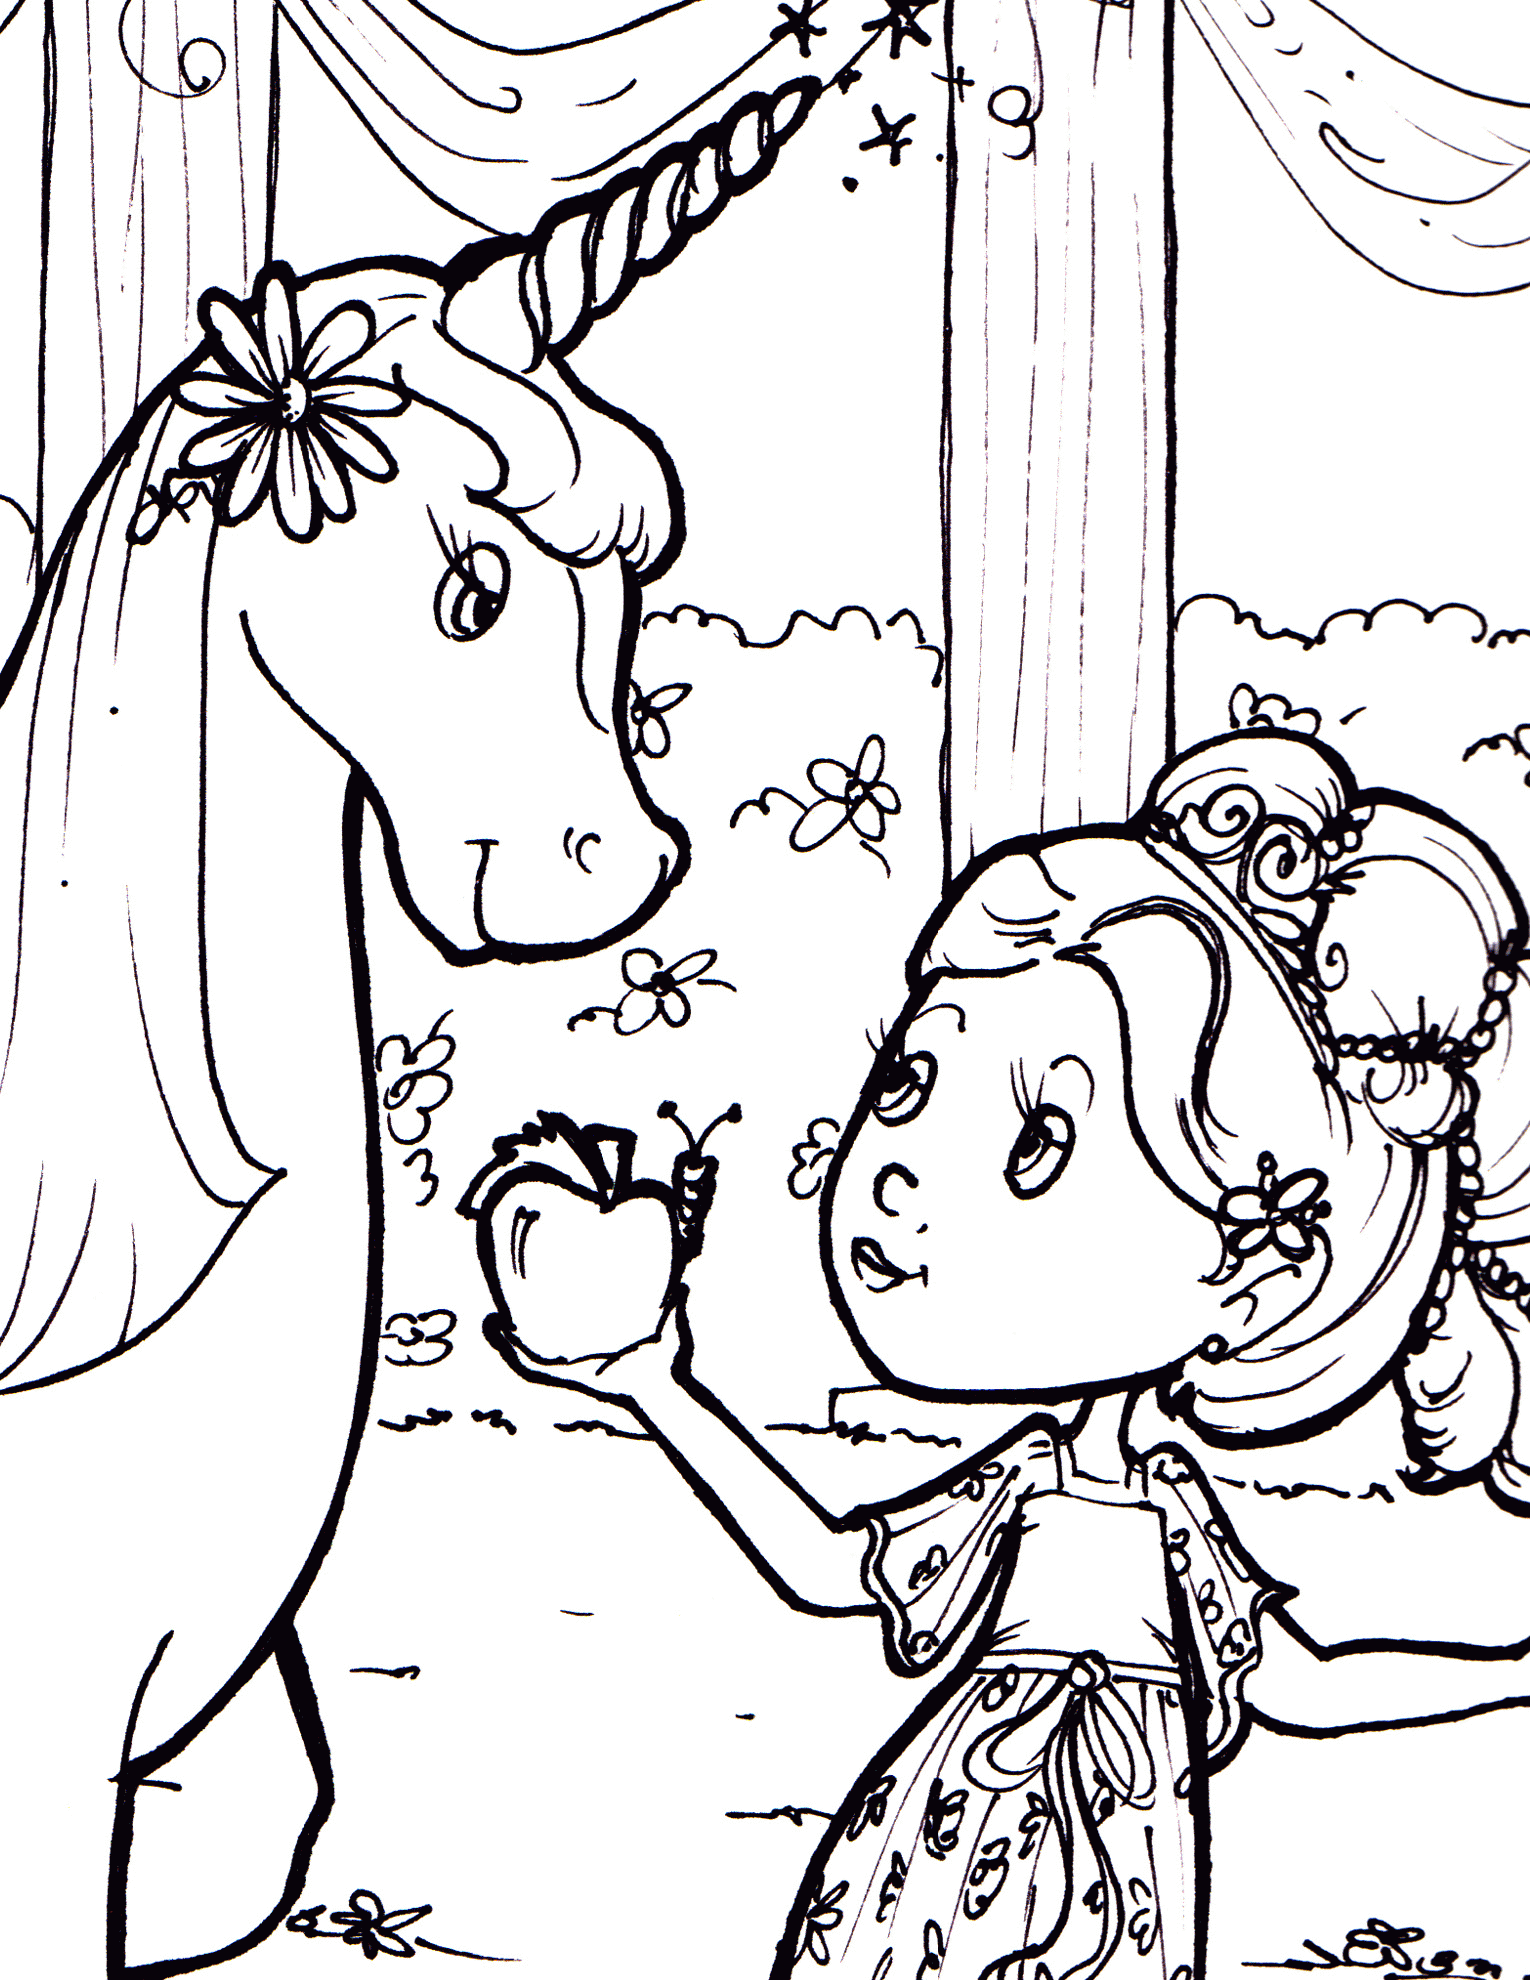 Free Princess Unicorn Coloring Pages, Download Free Princess Unicorn